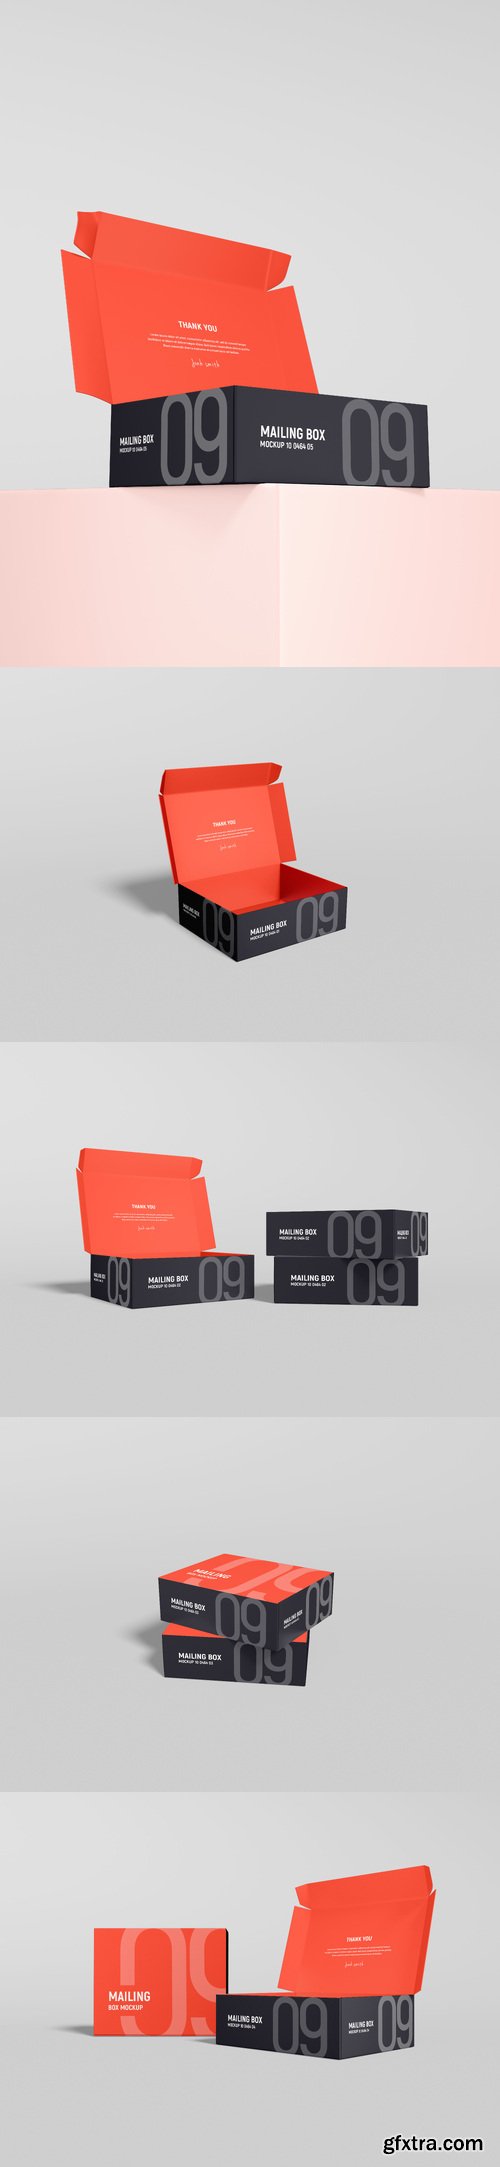 Paper mailing delivery square box branding mockup